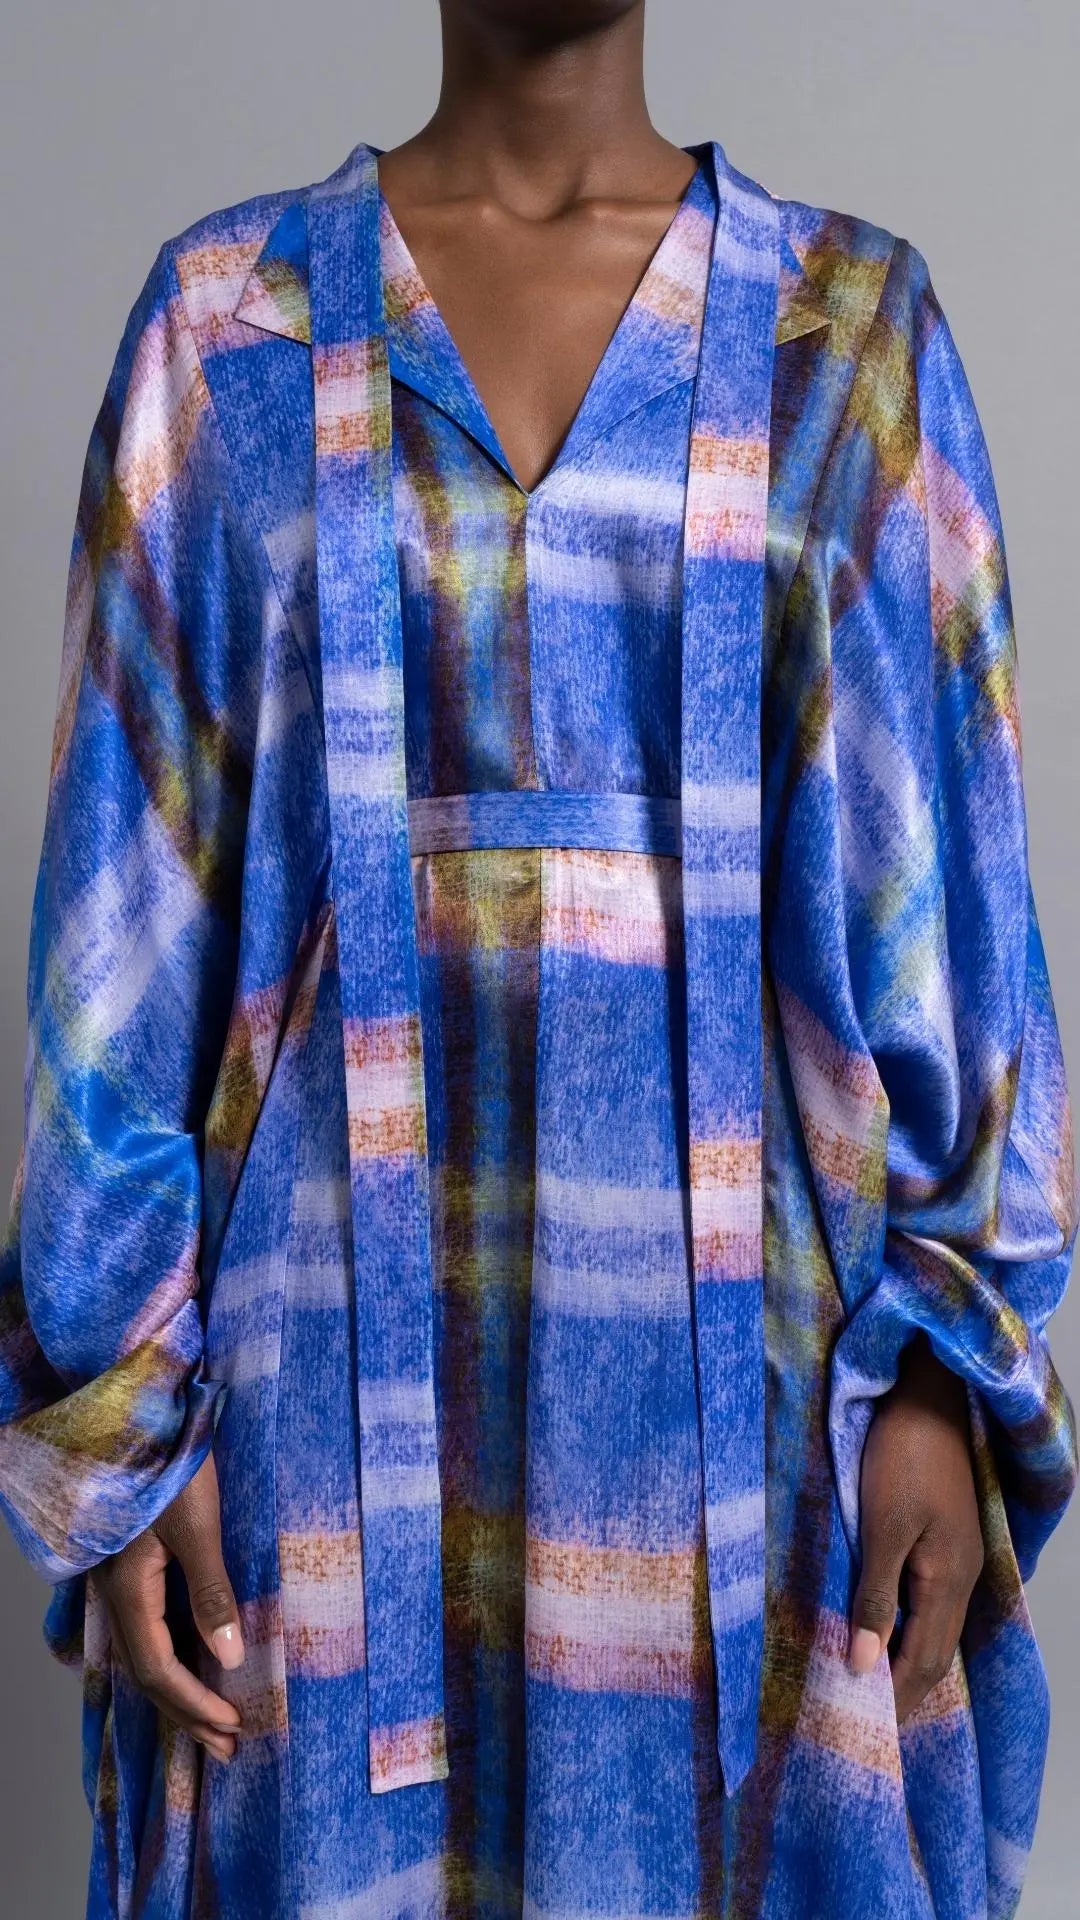 Thebe Magugu Blue Print Belted Kaftan. An elegant draped kaftan dress in blue with soft pink and grey striping. It features a V neck and can be belted to find the perfect fit for your body. It has long sleeves and is floor length. This photo shows a close up of the front top of the piece on the model facing front.